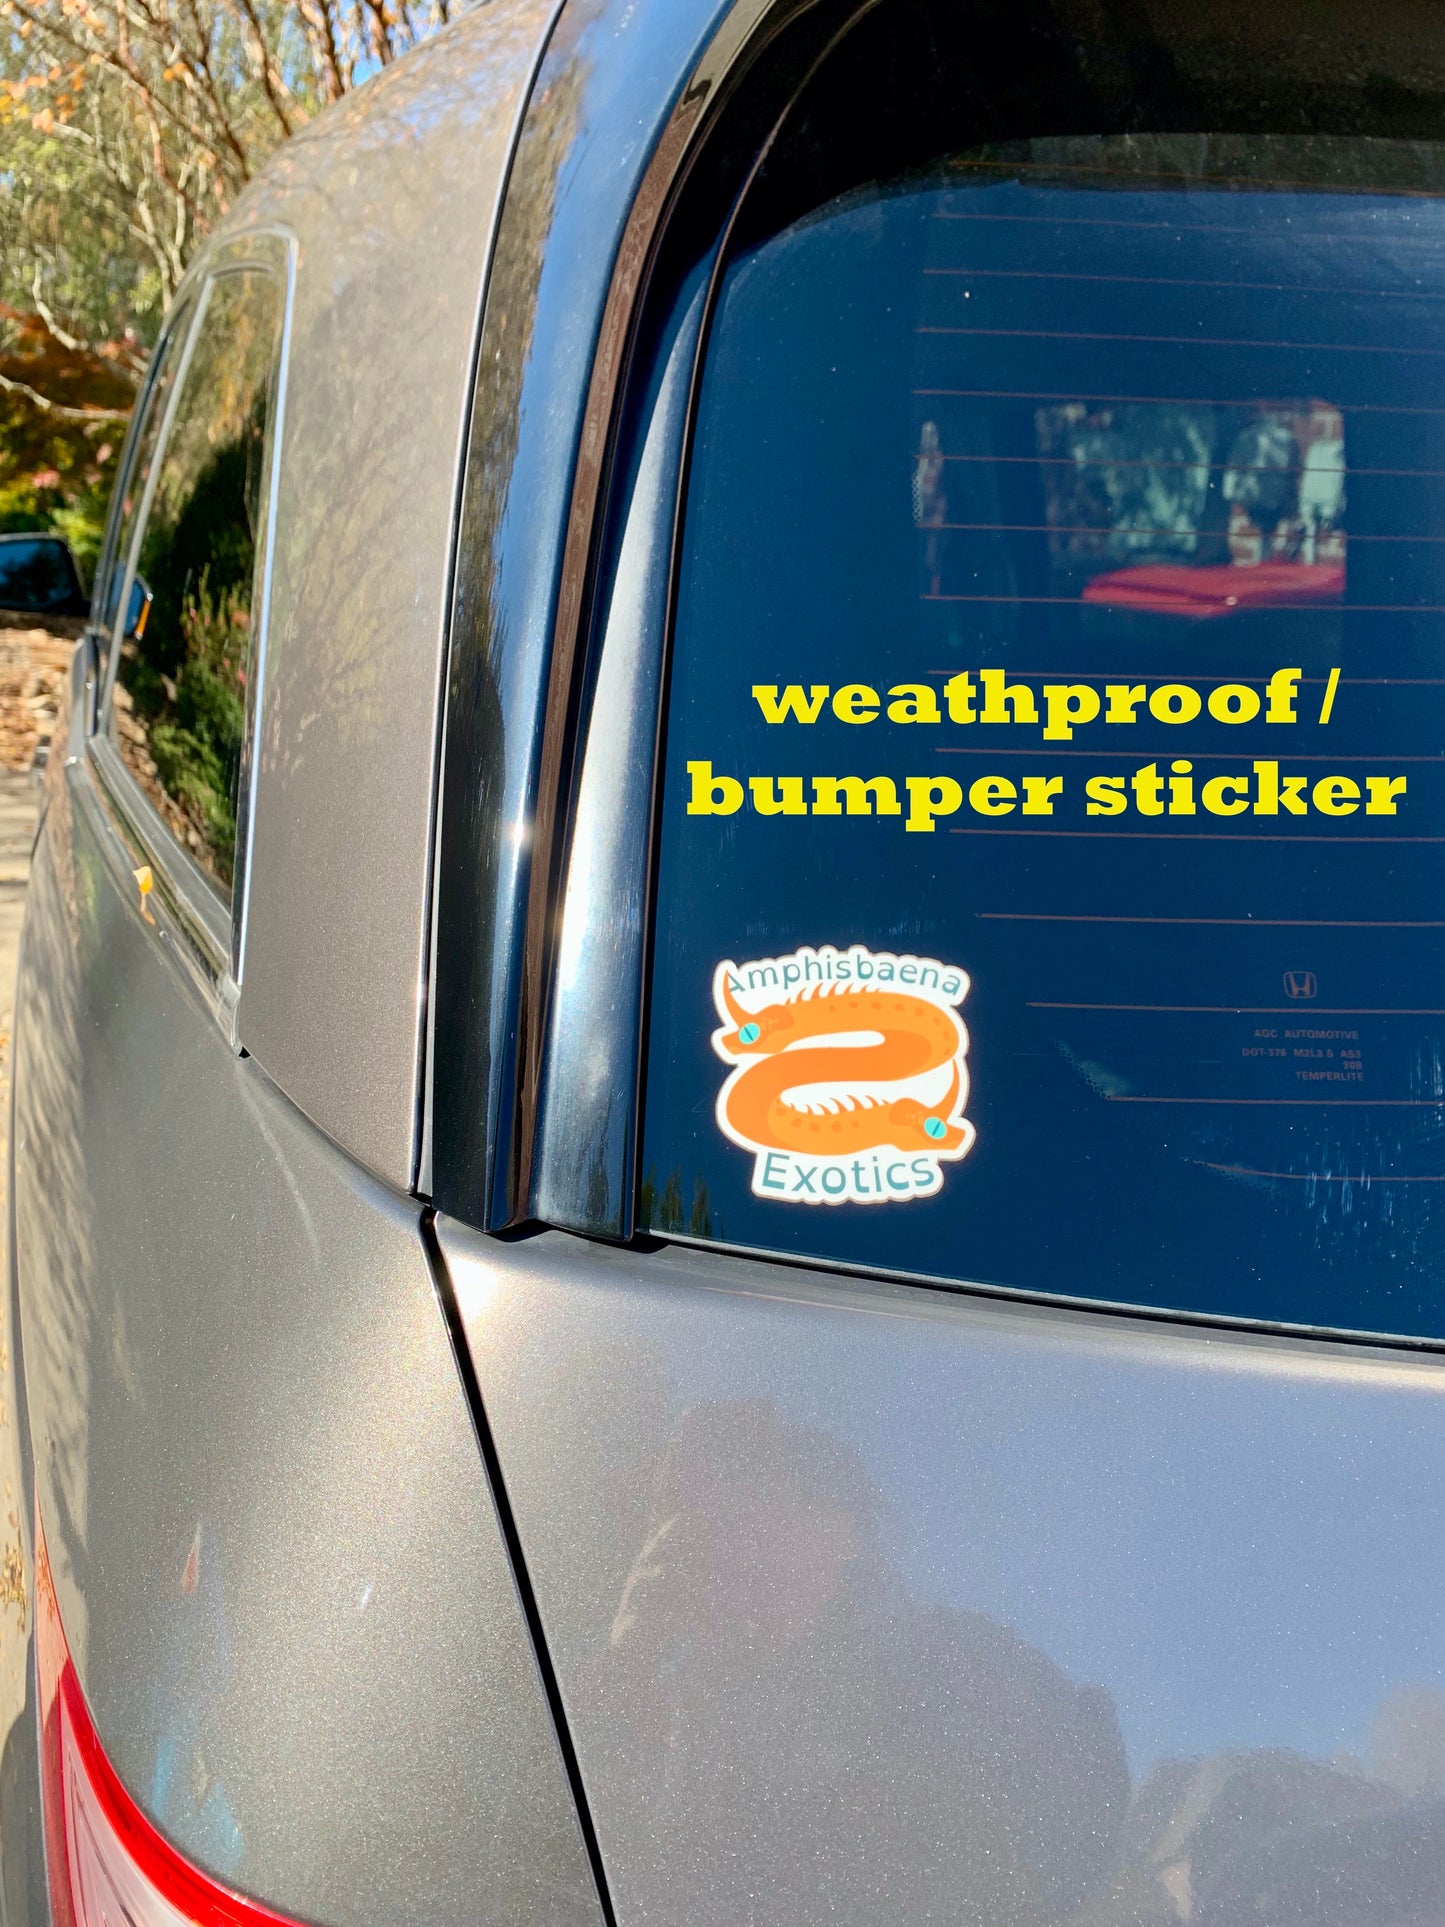 A photo of a decal from Amphibaena Exotics on a car window to show that the decal is weather resistant and durable